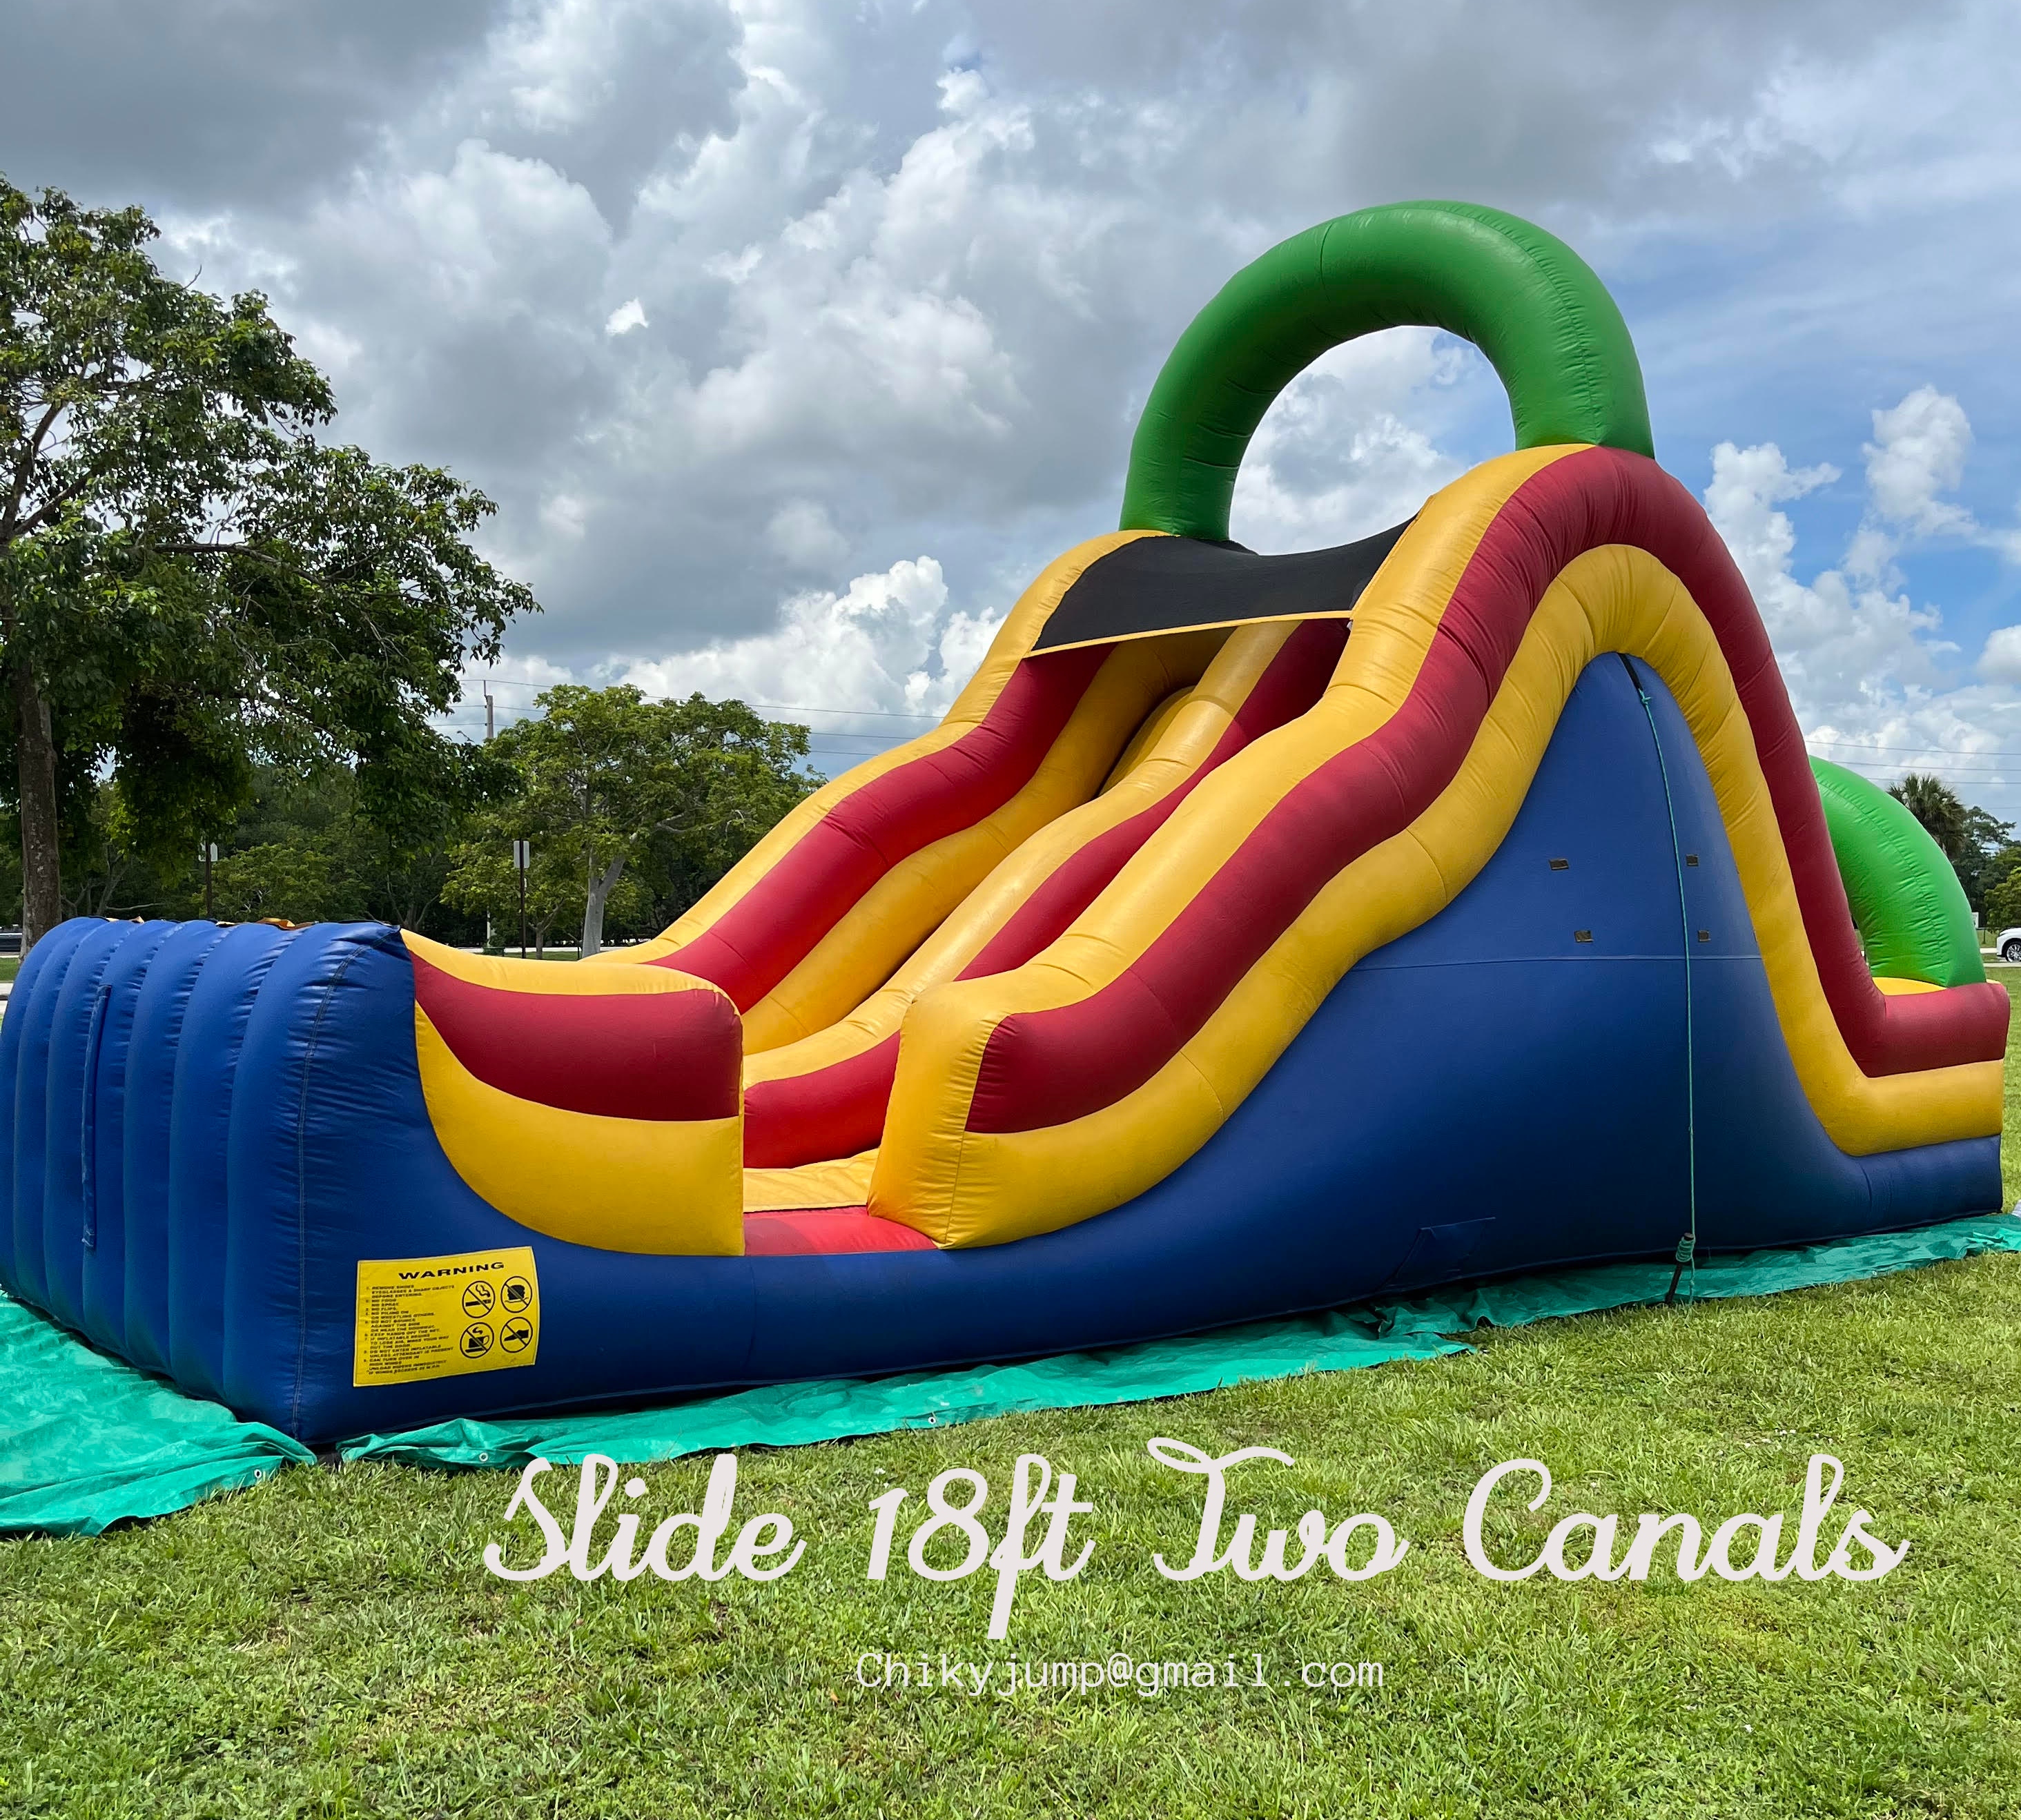 Slide 18ft Two Canals, Bounce House Rental